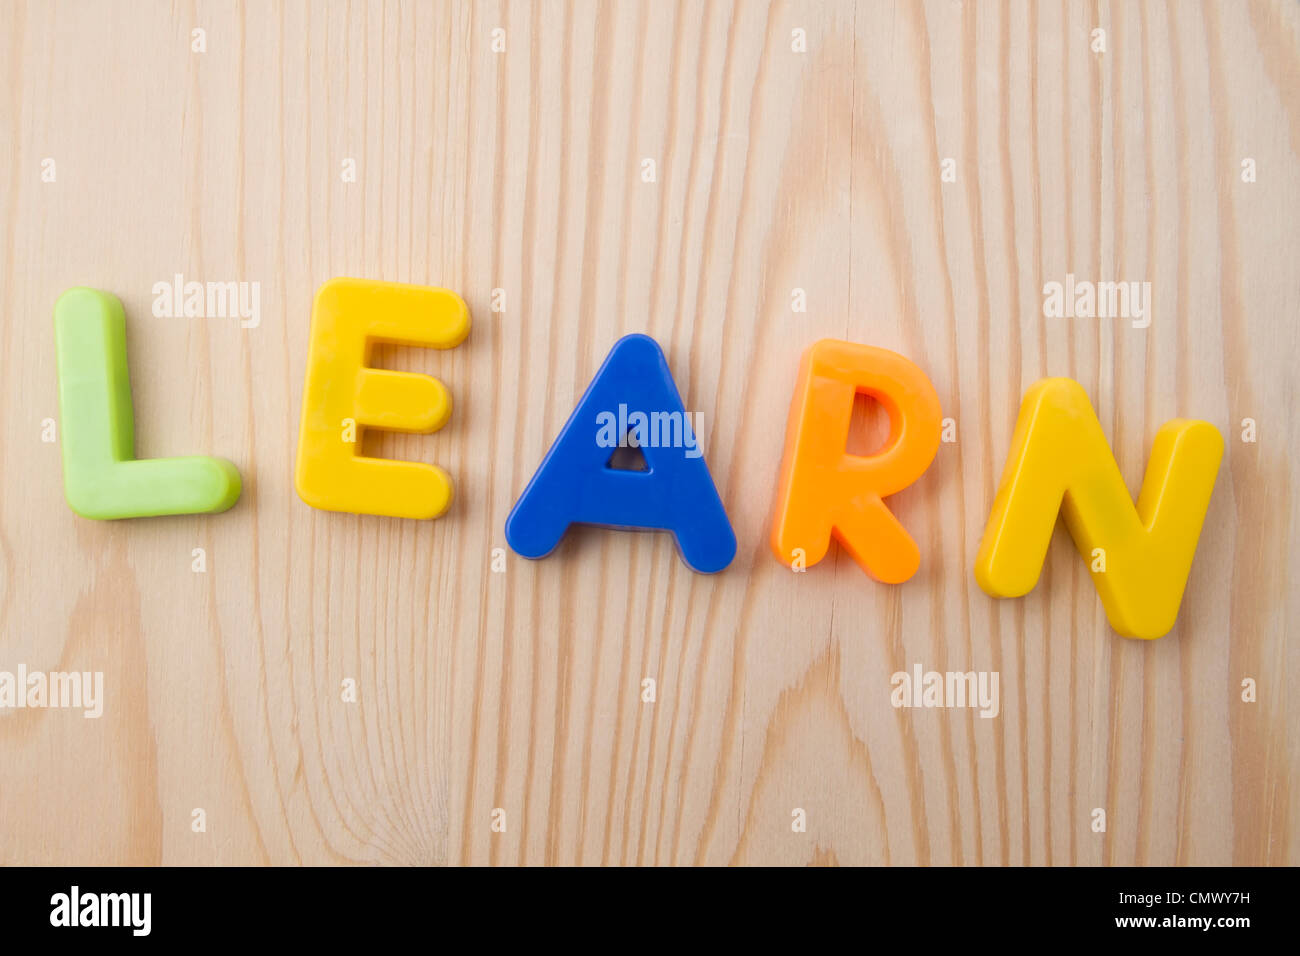 letter-magnets-learn-closeup-on-wood-background-stock-photo-alamy